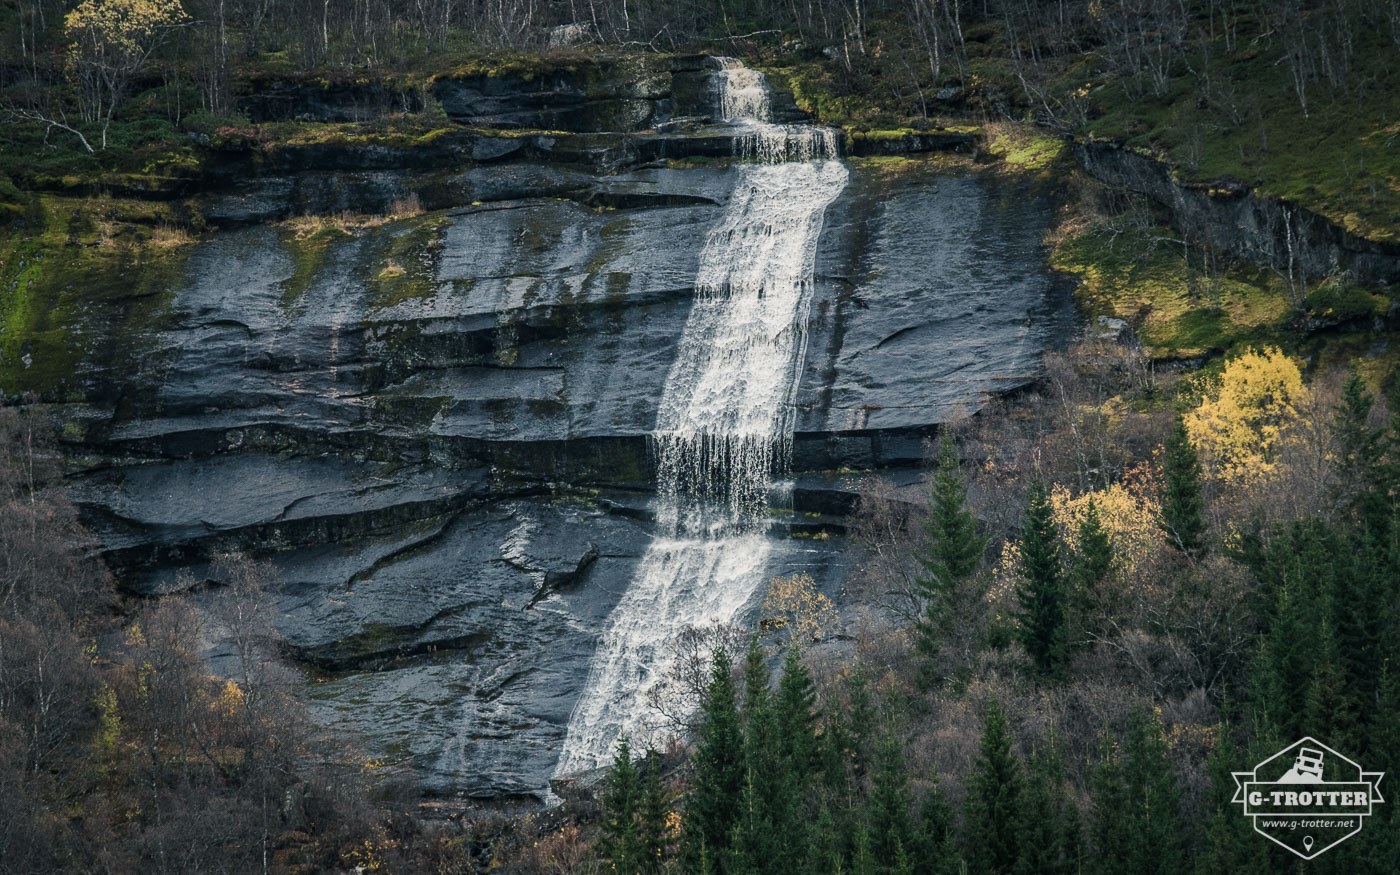 After rain, waterfalls stream out of ledges.
